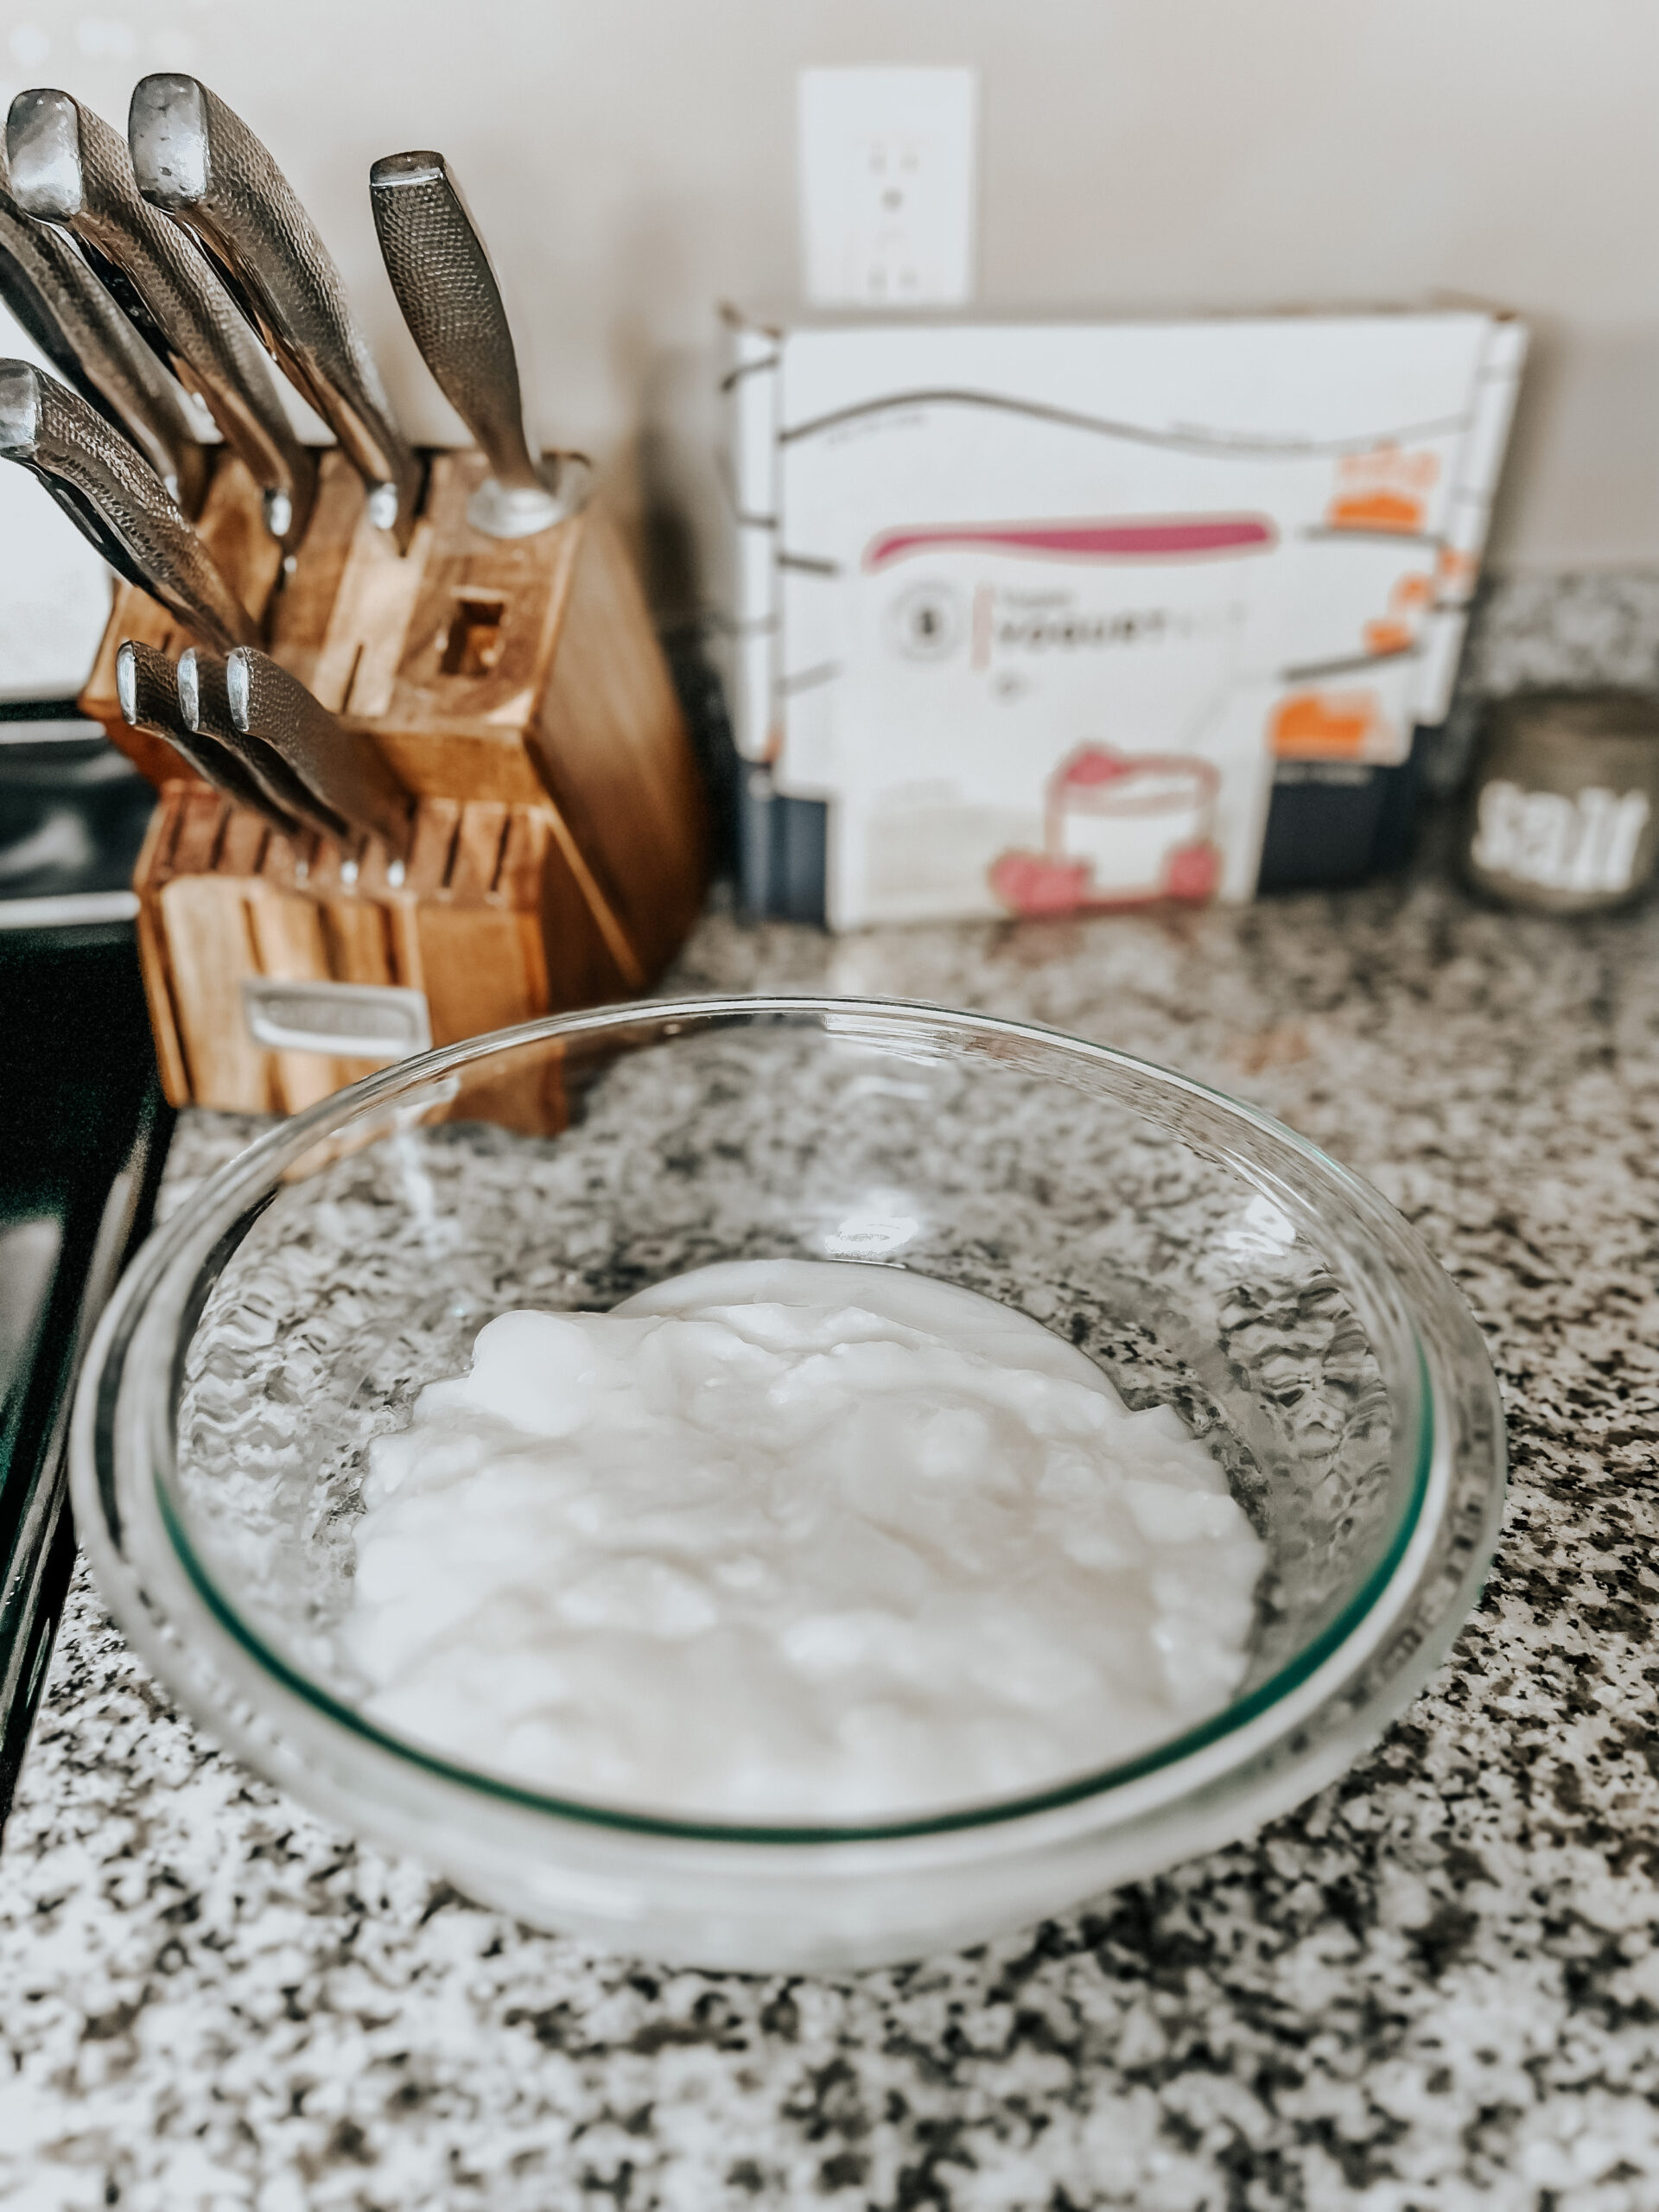 a dairy-free yogurt made out of rice milk in a glass mixing bowl